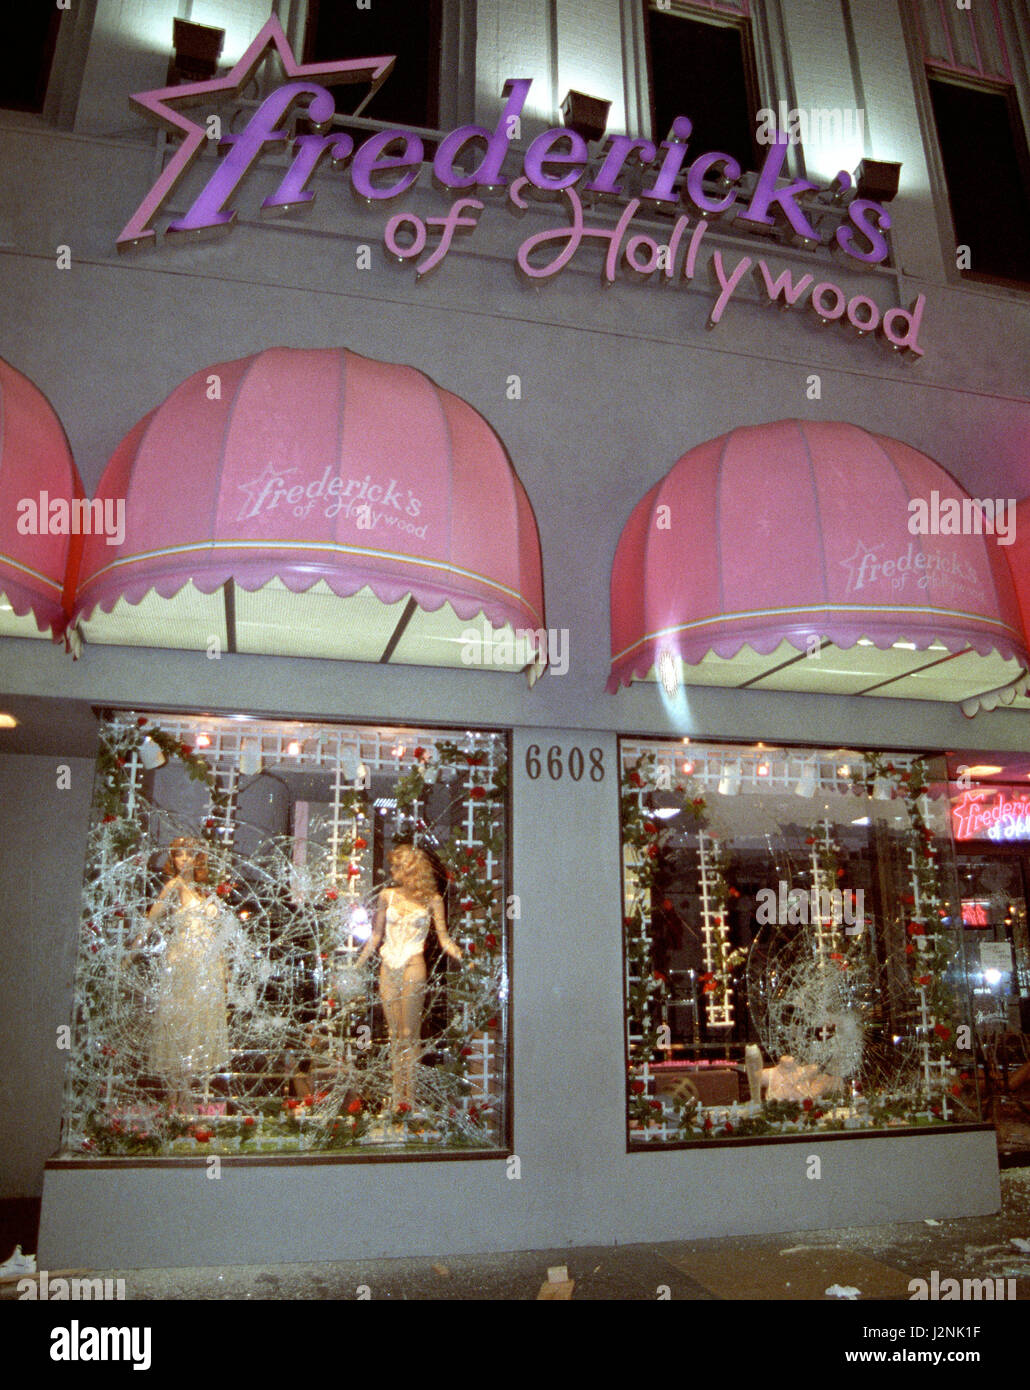 April 29/May 4 1992. Los Angeles CA. Famous Frederick's of Hollywood with broken windows. Coverage from the Los Angeles riots after the not guilty acquittal of policemen on trial in beating of Rodney King. In total, 55 people were killed during the riots, more than 2,000 people were injured, and more than 11,000 were arrested and $1 billion in property damage.Photos by Gene Blevins/LA DailyNews/ZumaPress. Credit: Gene Blevins/ZUMA Wire/Alamy Live News Stock Photo